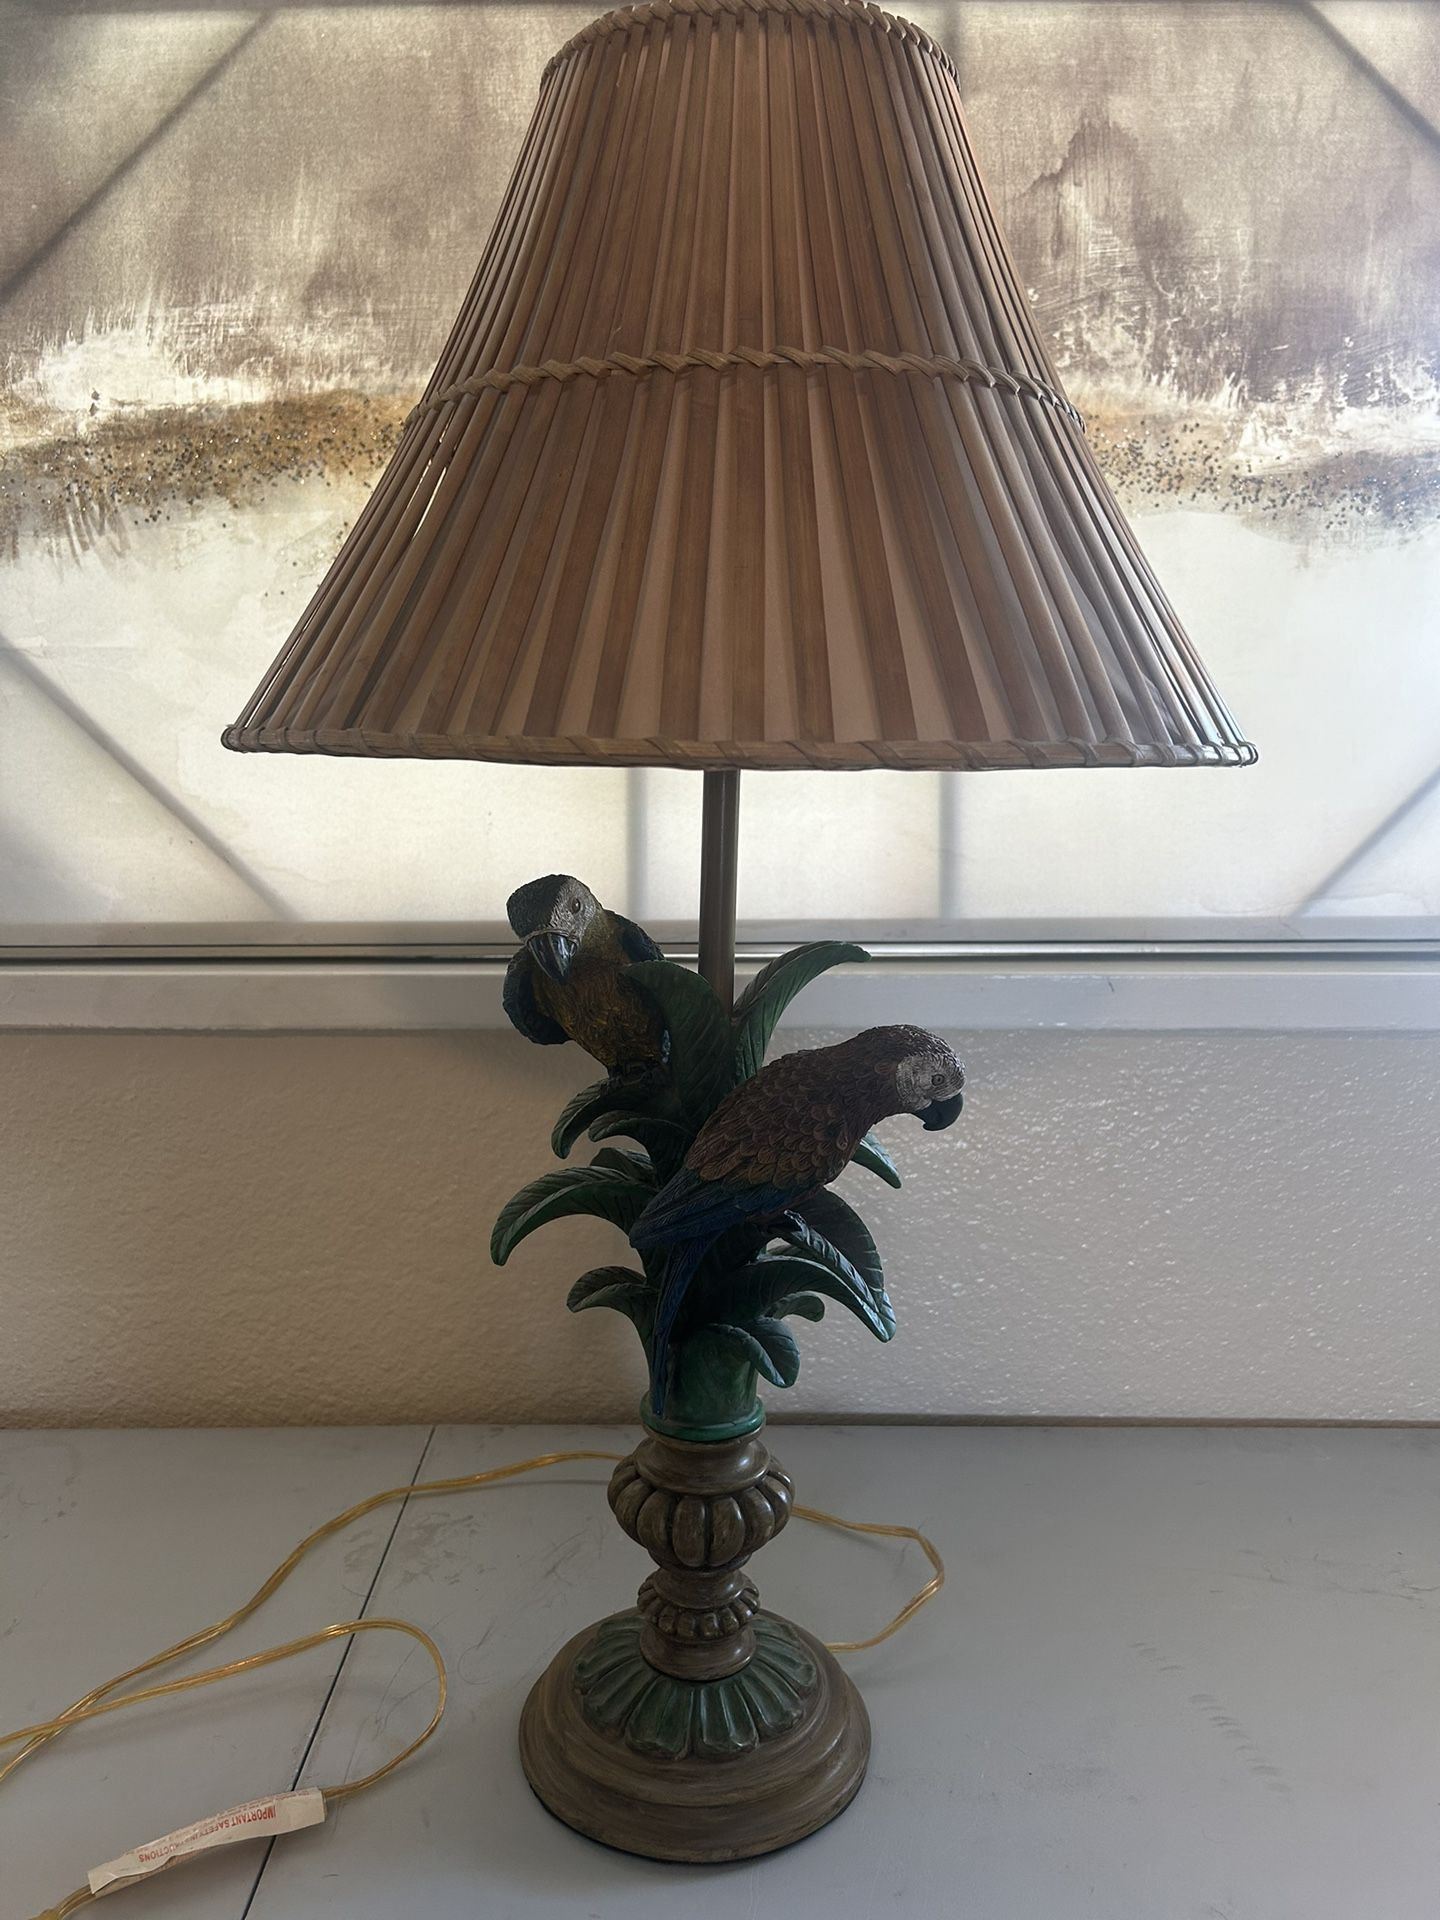 Vintage Chapman Parrot Lamp with Bamboo shade